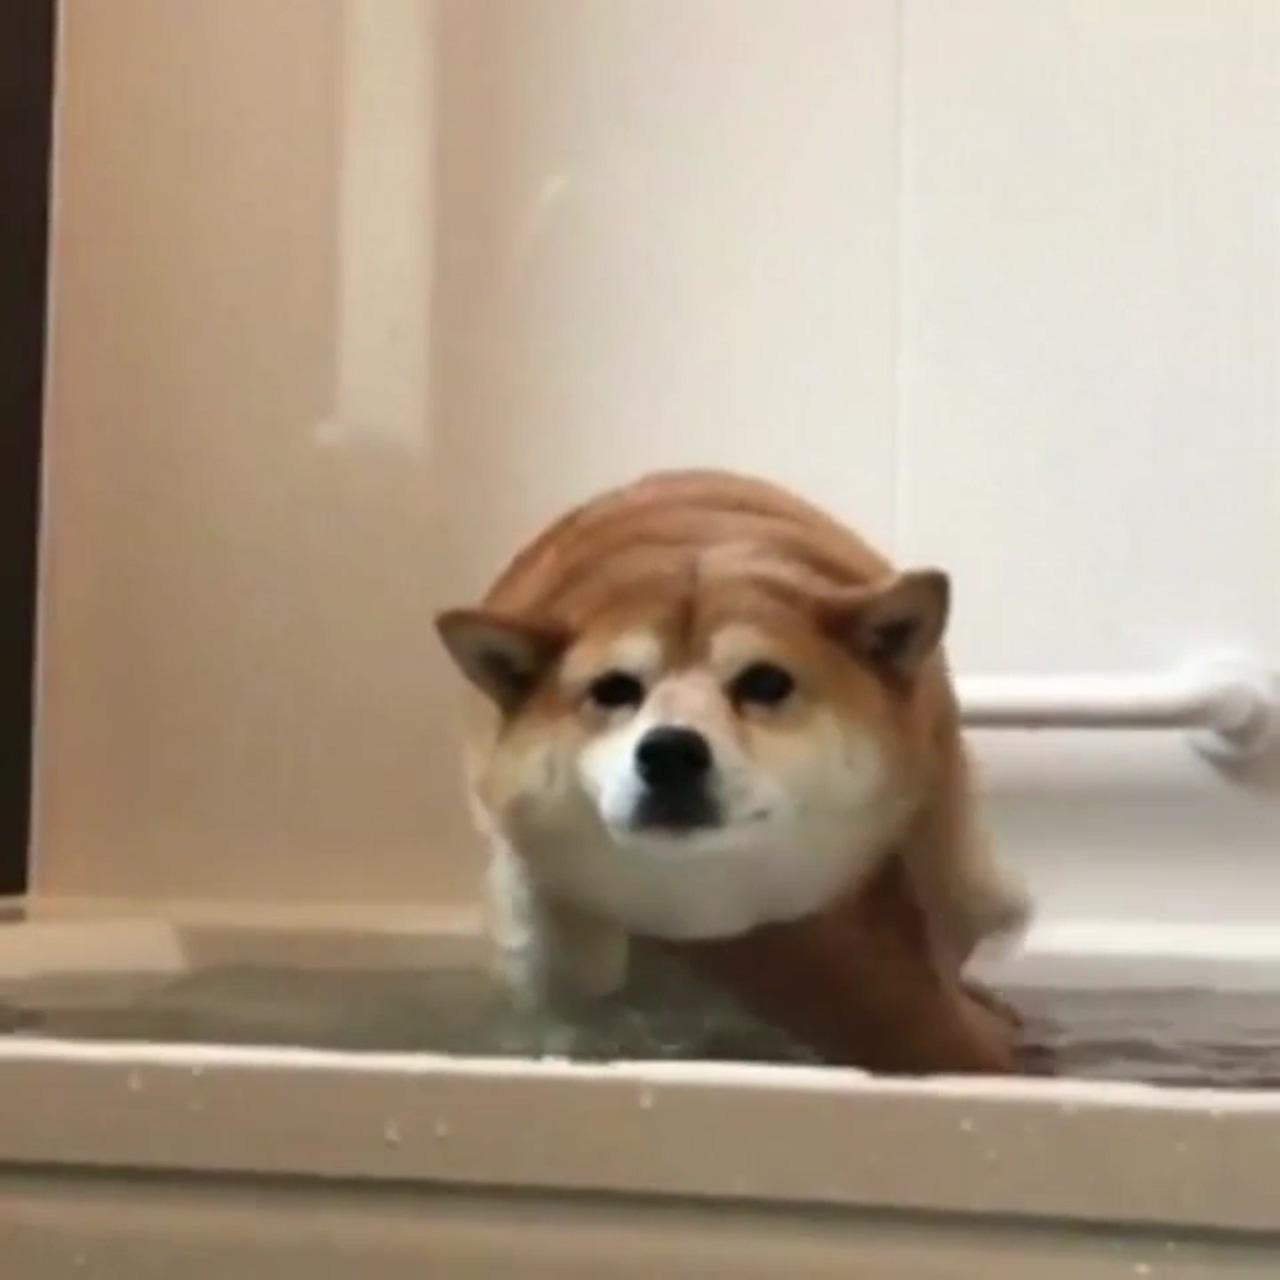 Ladies and gents, a shiba inu being lowered into a bathtub; cute funny animals